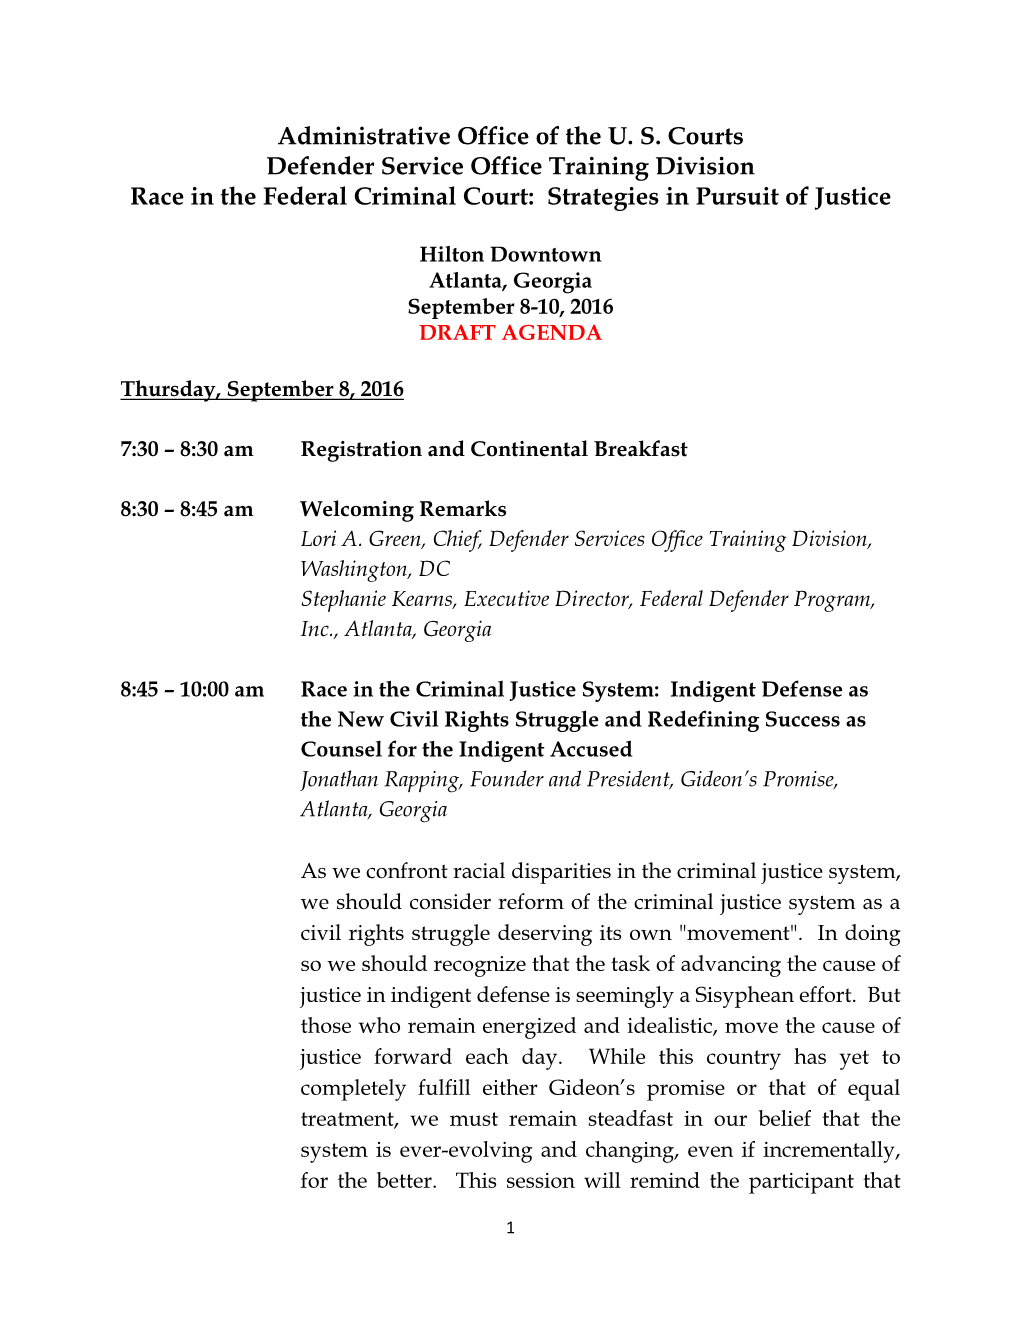 Administrative Office of the U. S. Courts Defender Service Office Training Division Race in the Federal Criminal Court: Strategies in Pursuit of Justice